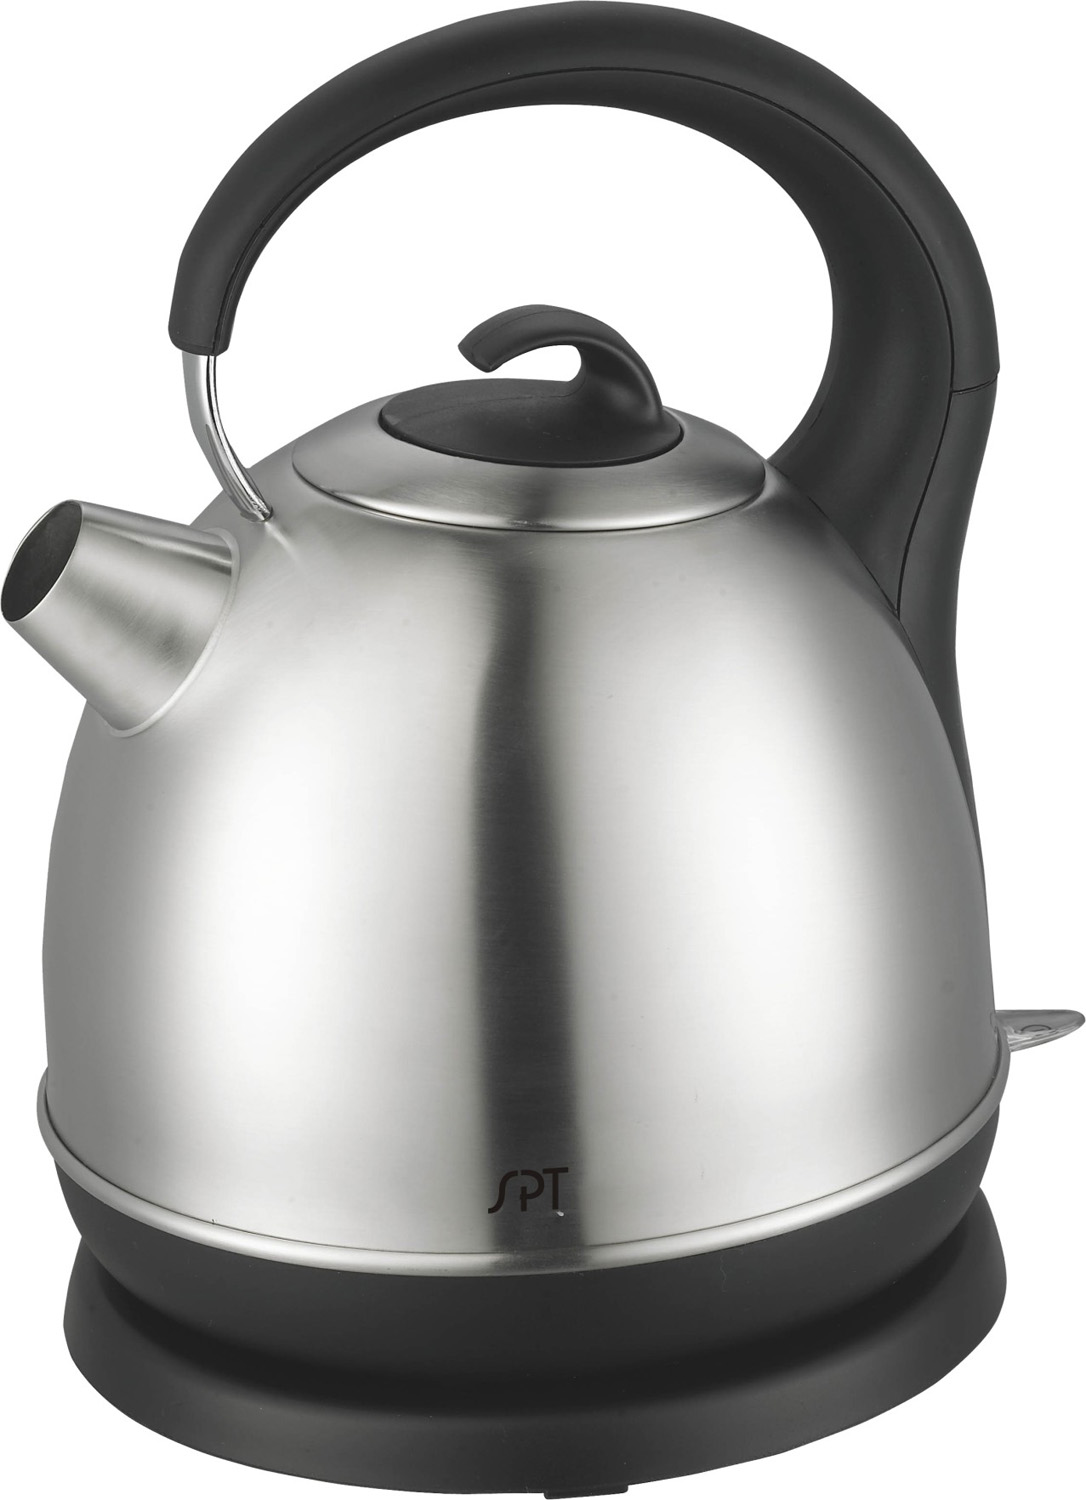 SPT SK-1715S Stainless Cordless Electric Kettle